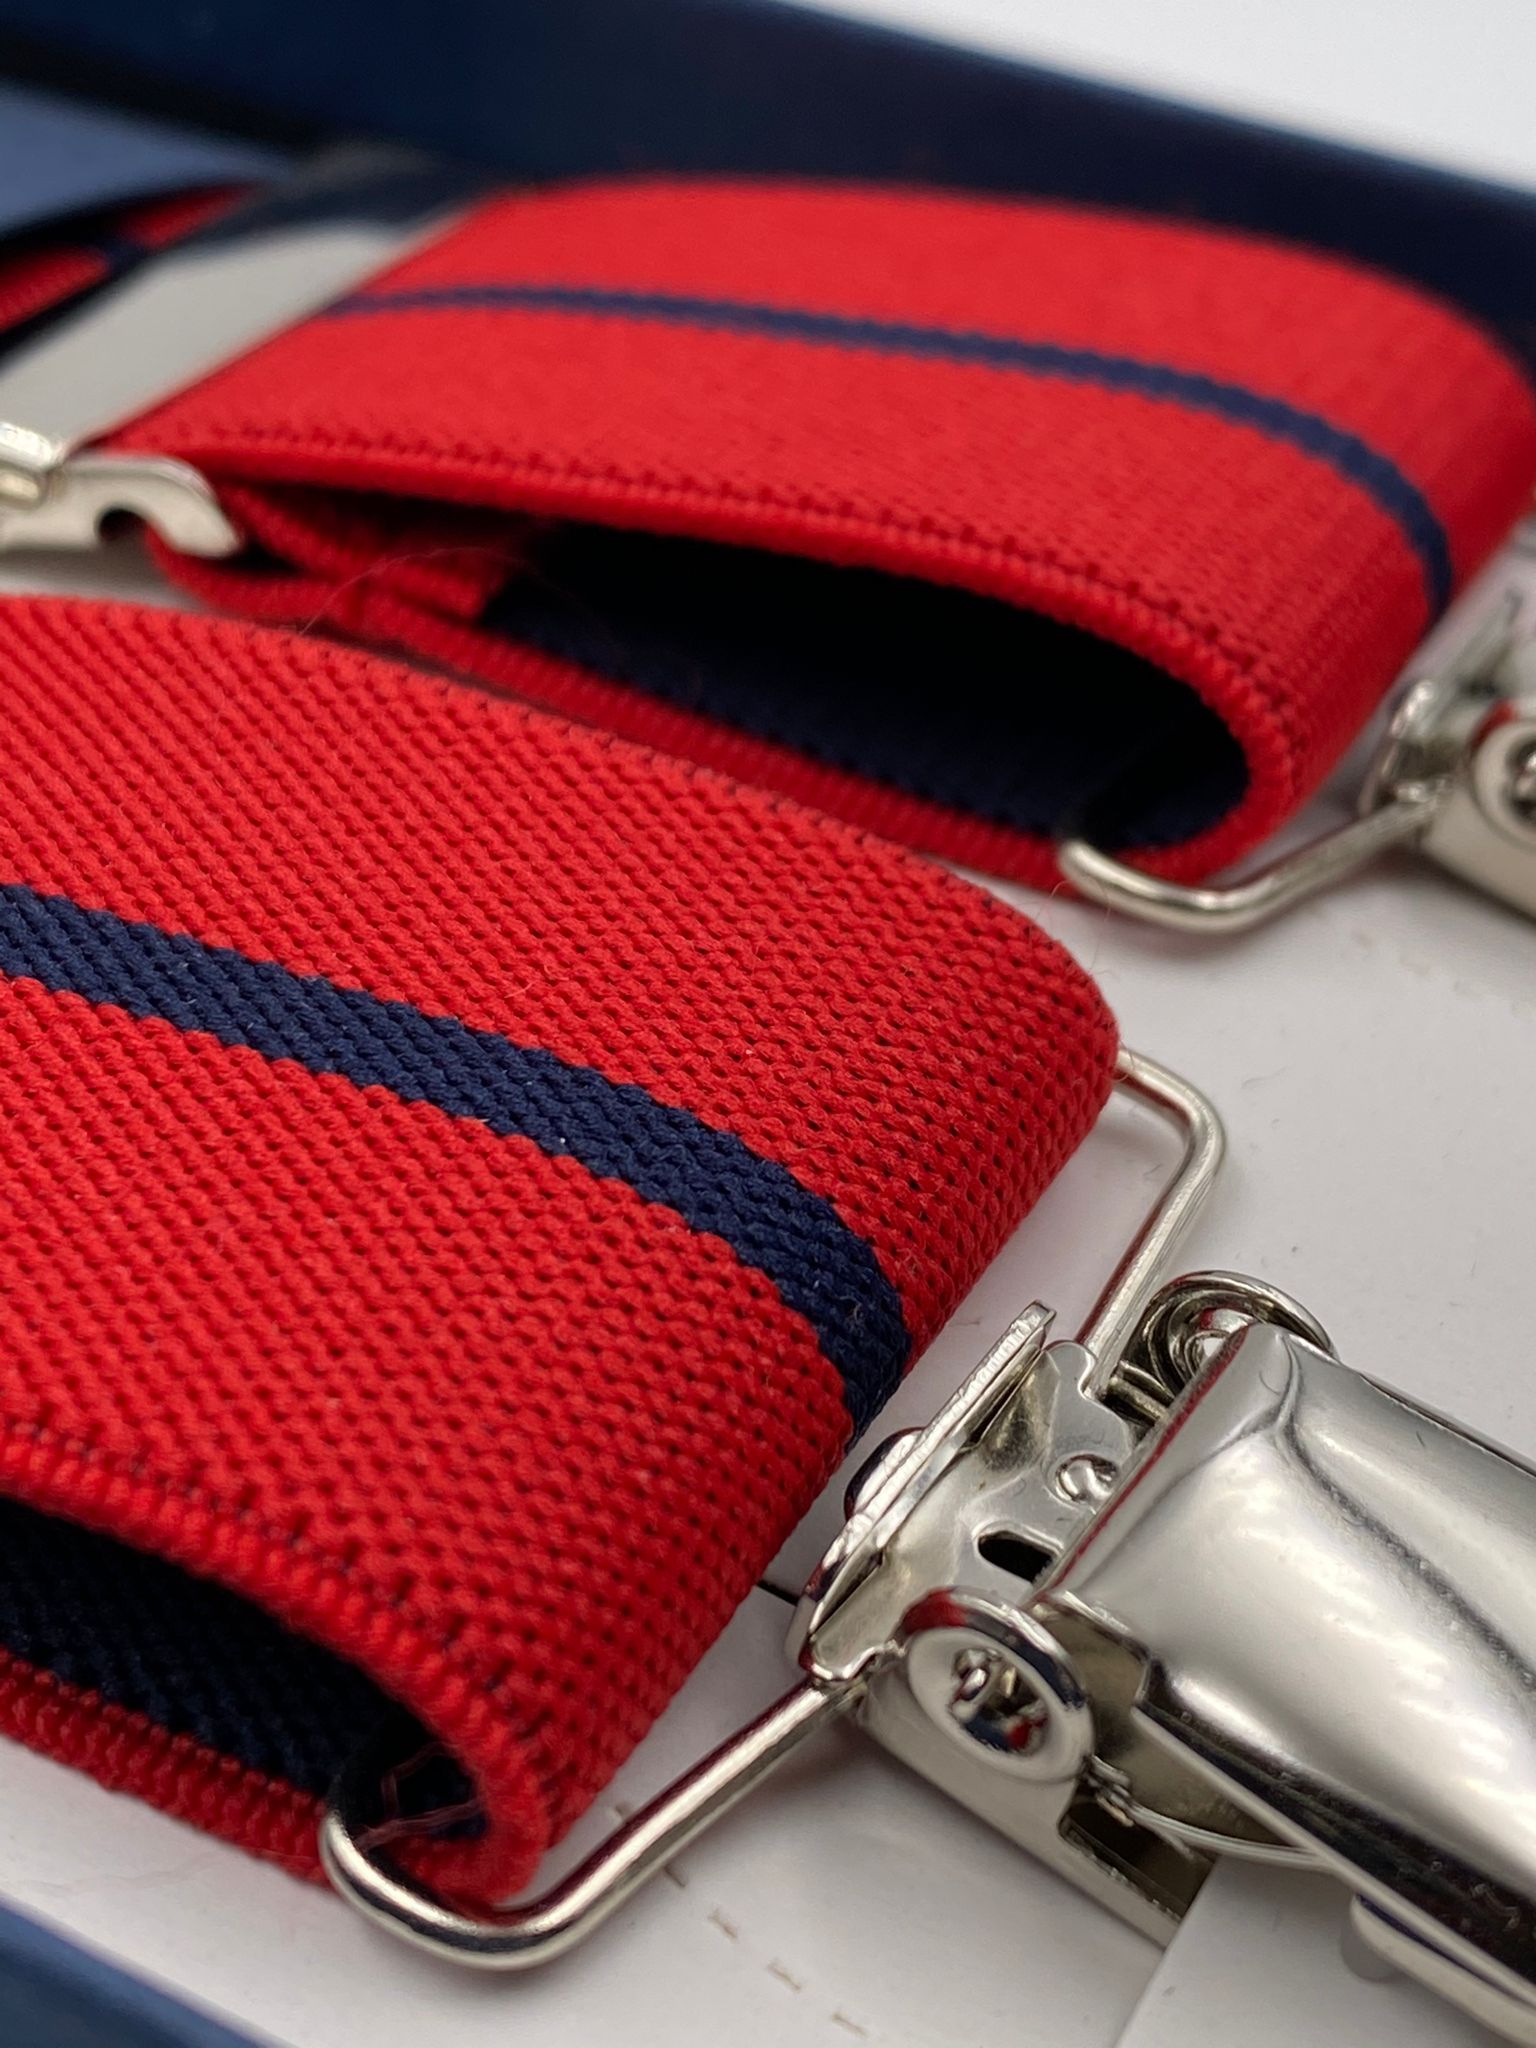 Albert Thurston for Cruciani & Bella Made in England Clip on Adjustable Sizing 35 mm elastic braces Red and Blue Stripe X-Shaped Nickel Fittings Size: L #4819